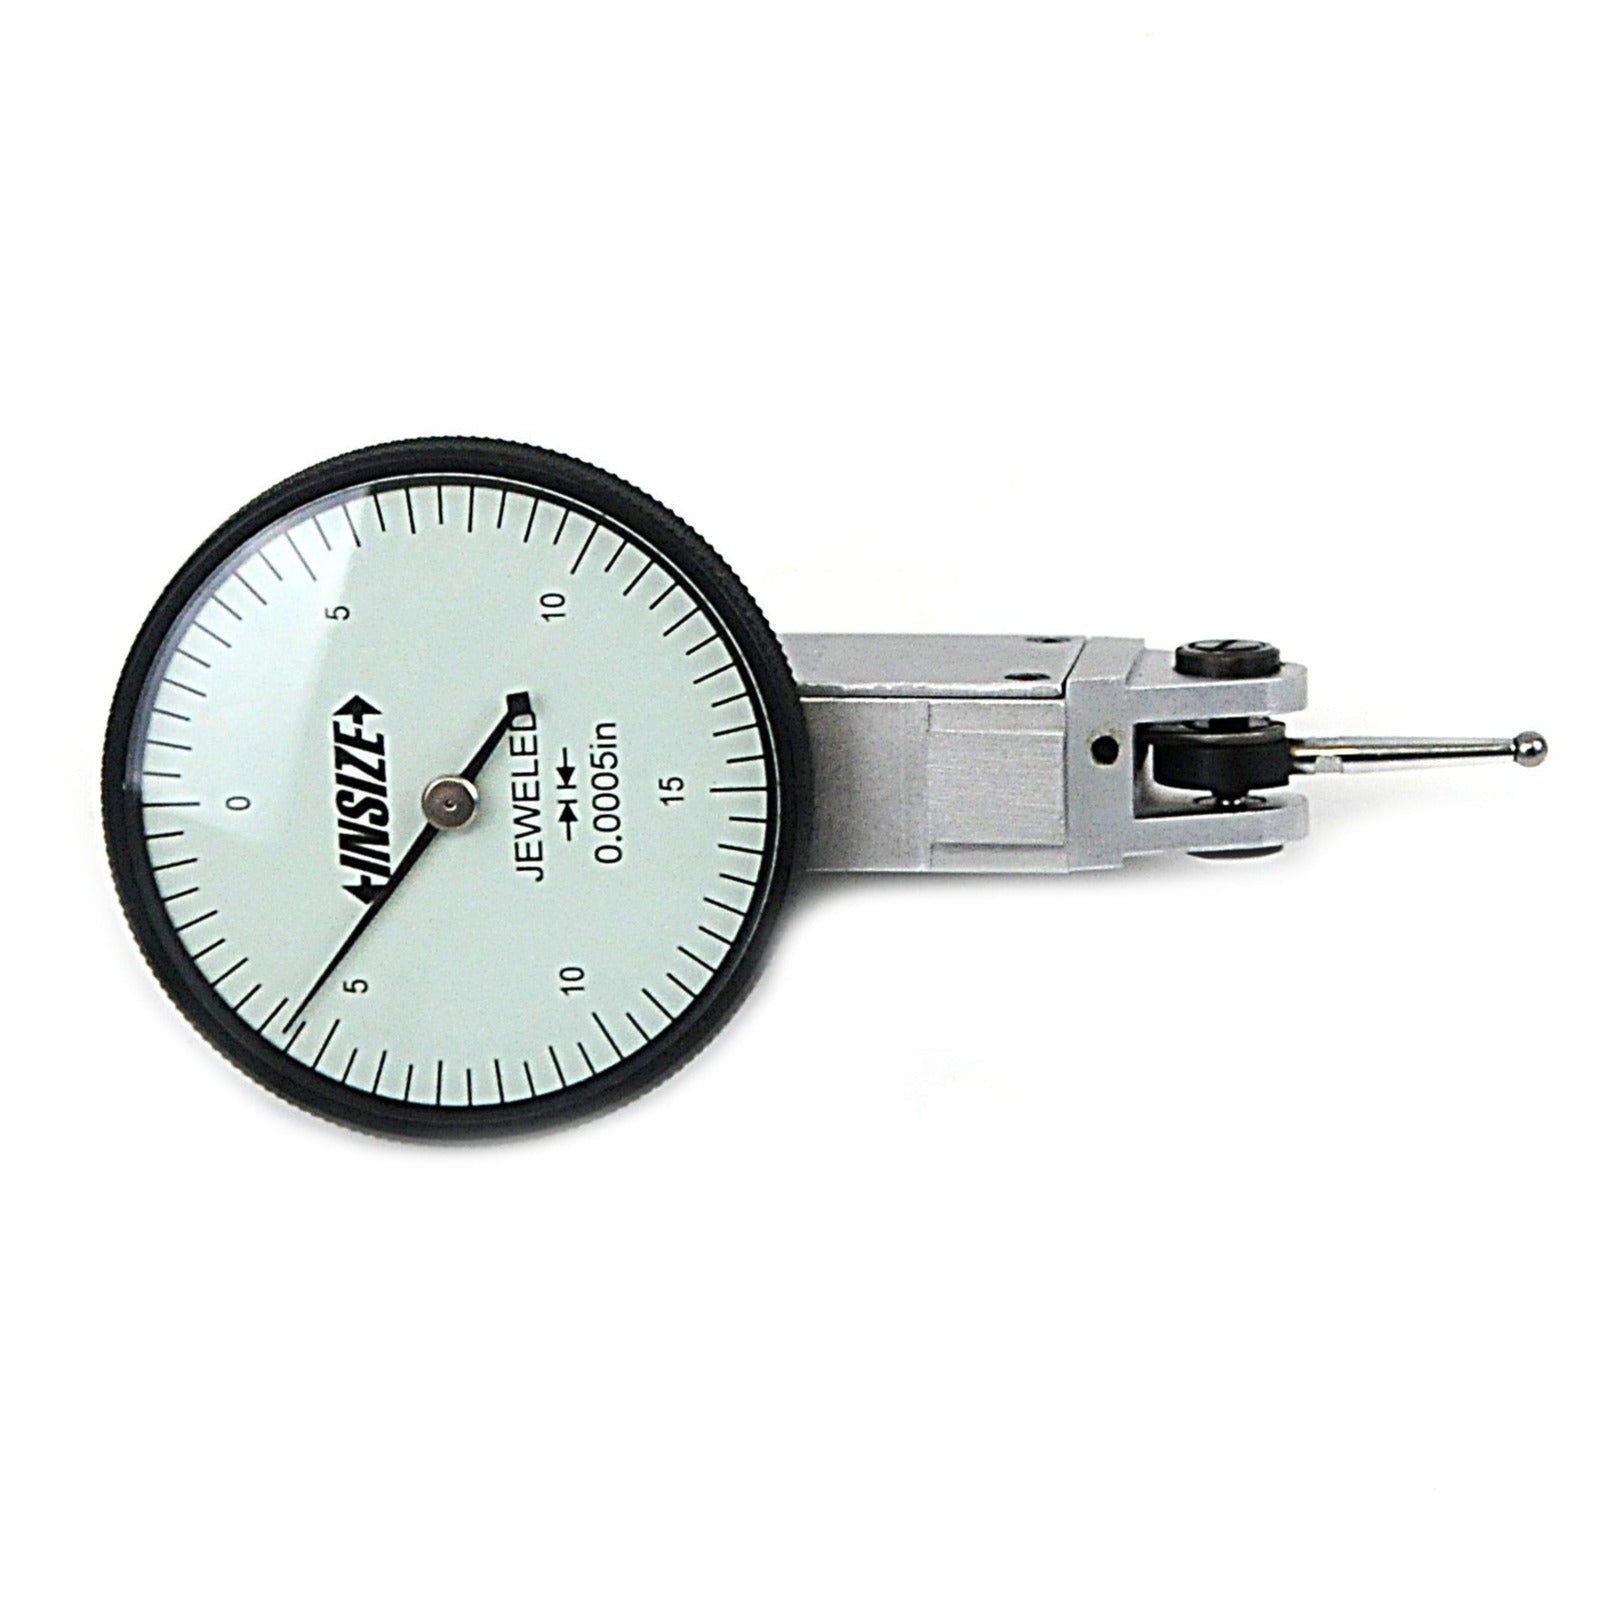 Insize Imperial Dial Indicator 0.03" Range Series 2381-35